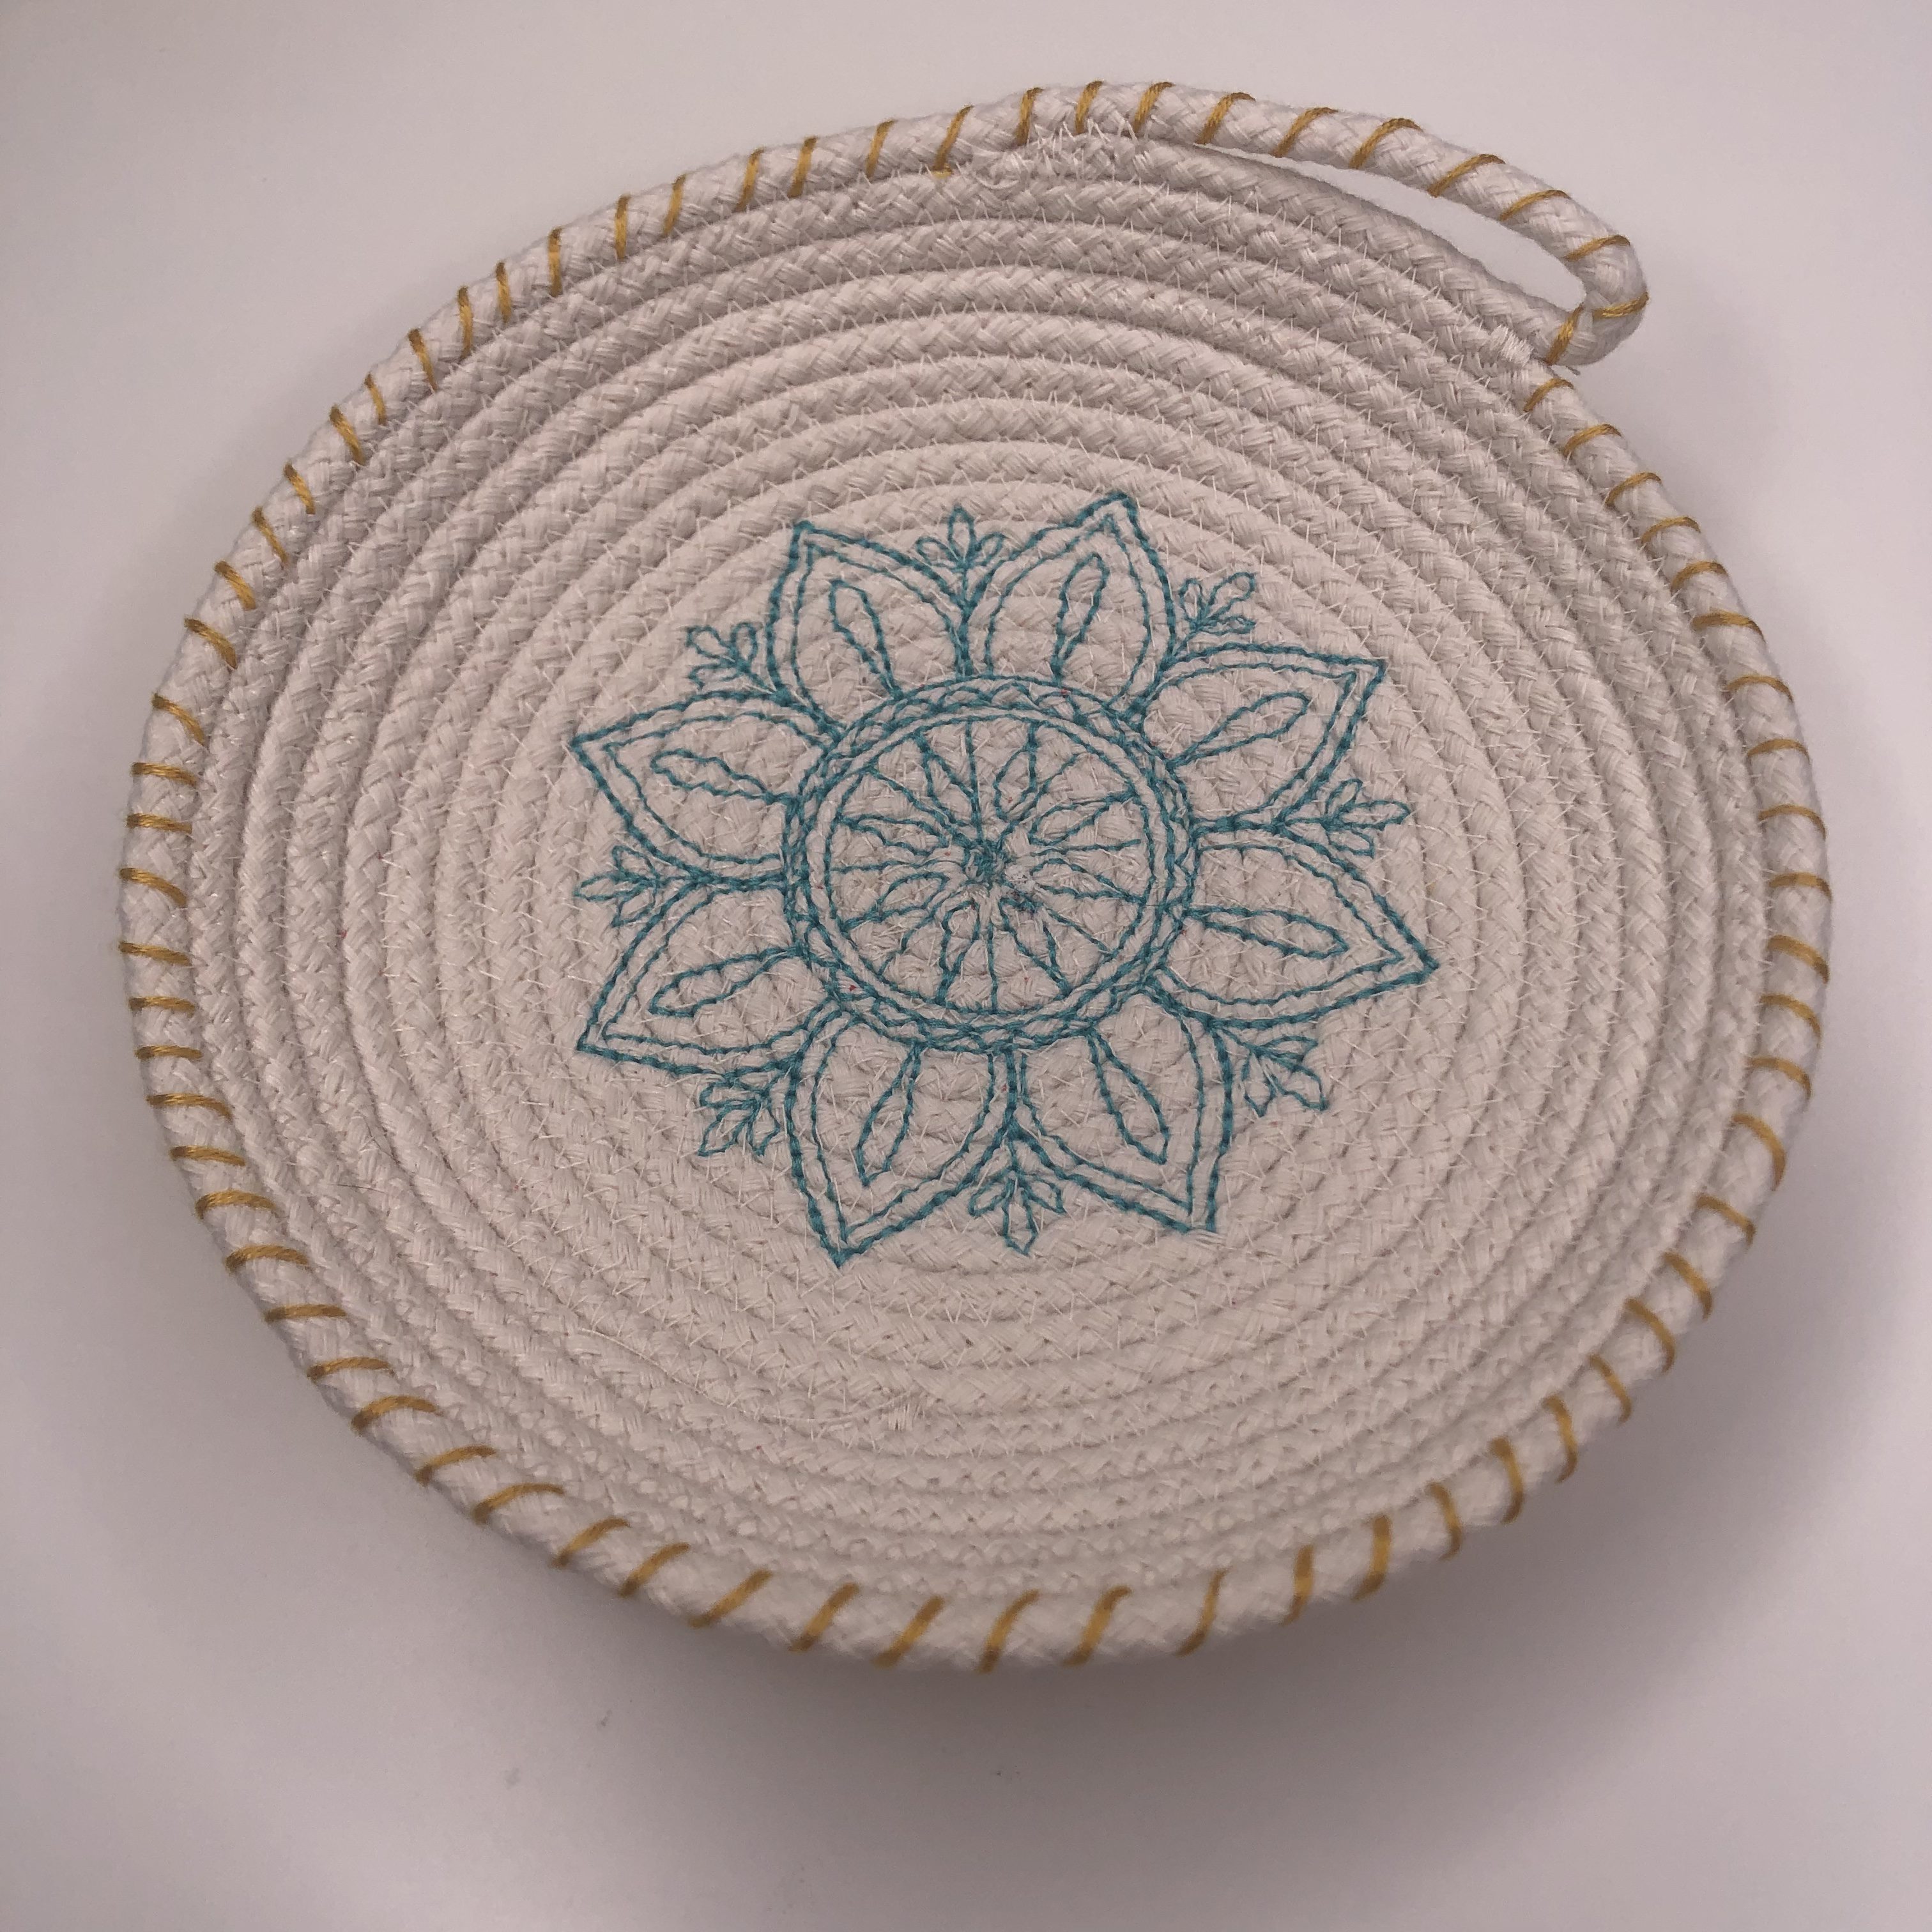 How to Choose the Best Embroidery Hoop Stand - The Craft Blogger